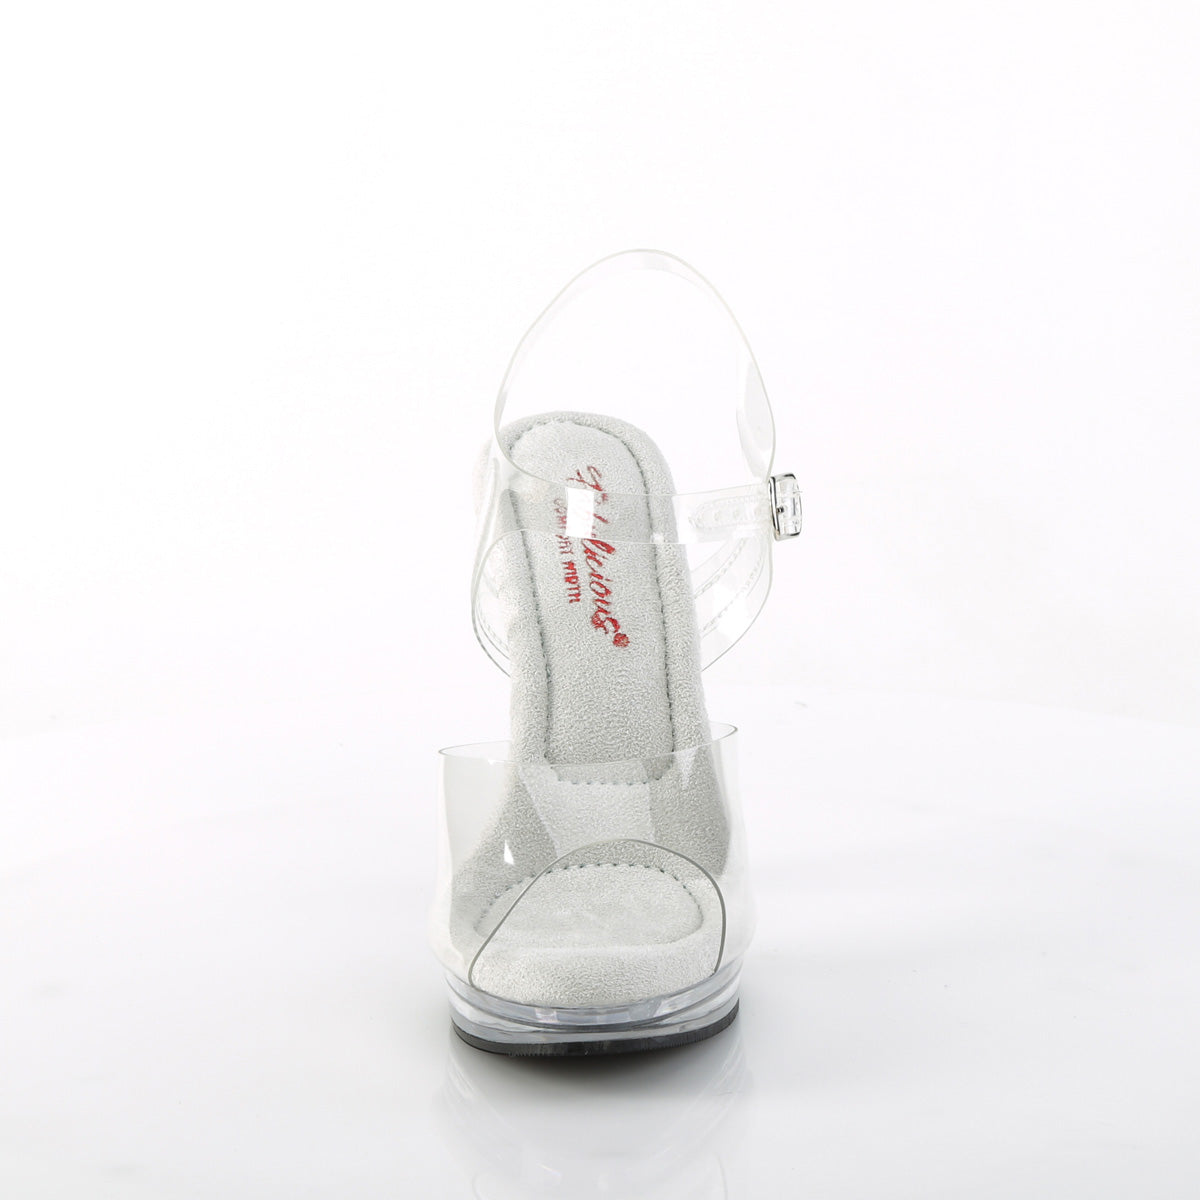 GLORY-508 Fabulicious Transparent Clear Shoes [Posing Heels]